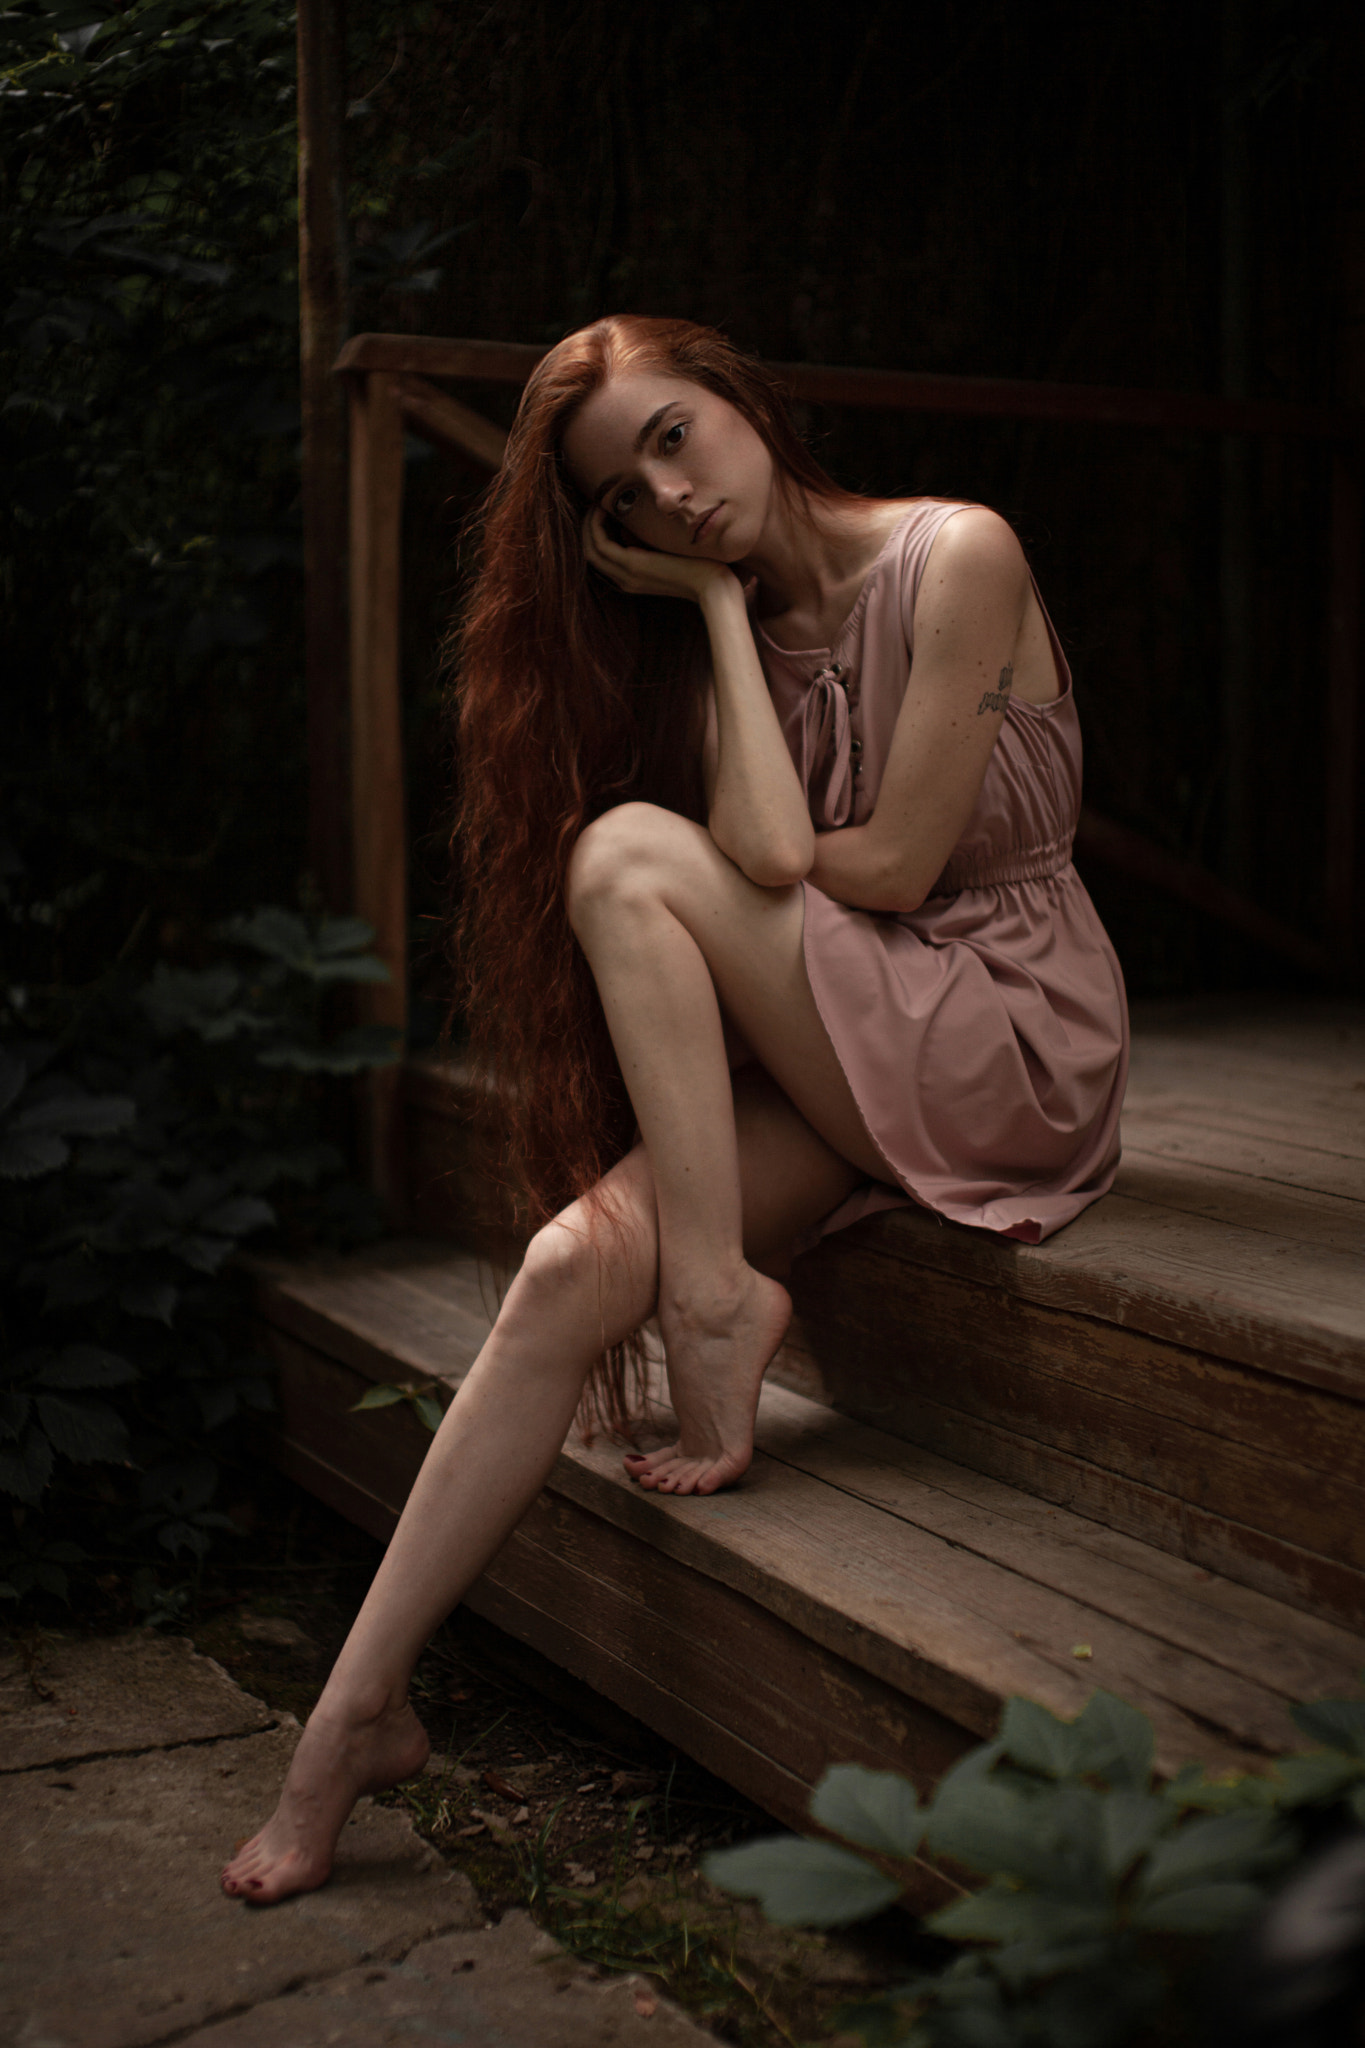 Andrey Frolov Women Redhead Long Hair Resting Head Dress Pink Clothing Tattoo Legs Barefoot Stairs P 1365x2048